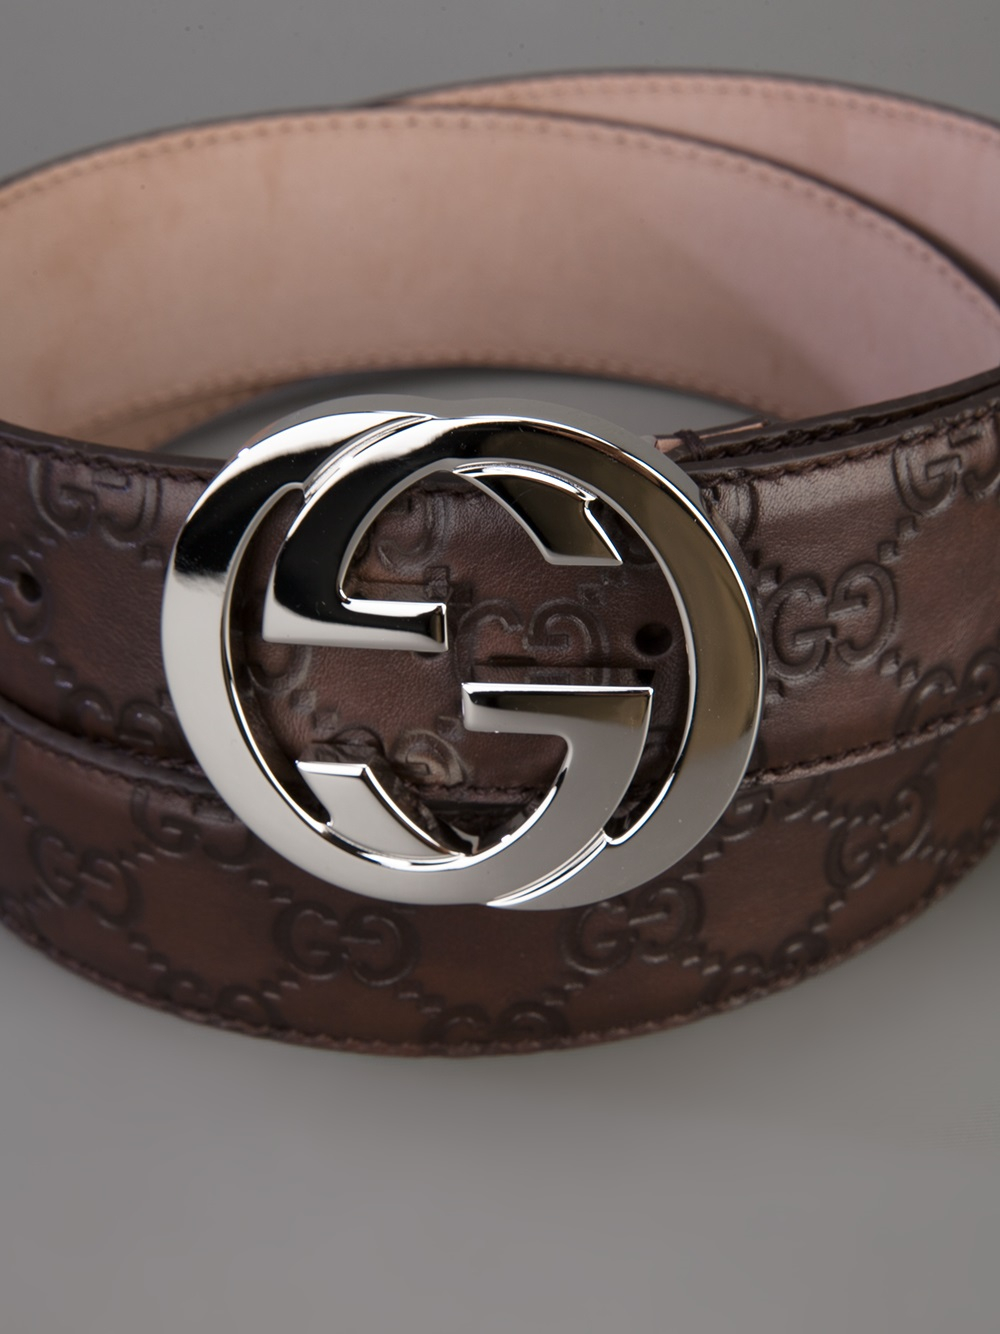 Lyst - Gucci Embossed Brand Buckle Belt in Brown for Men